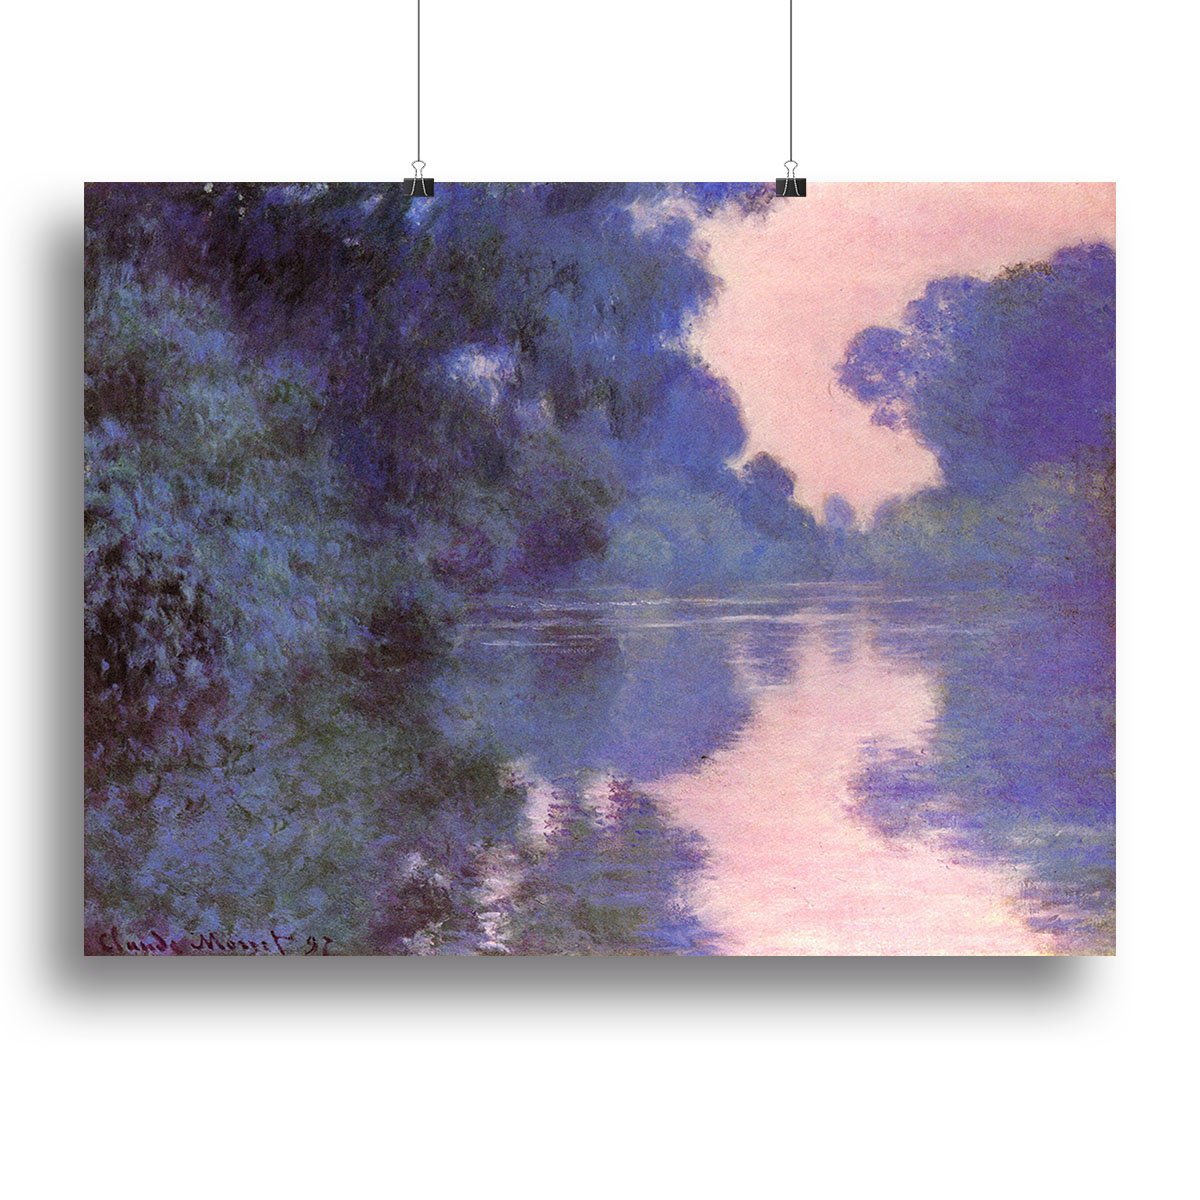 Seine arm at Giverny by Monet Canvas Print or Poster